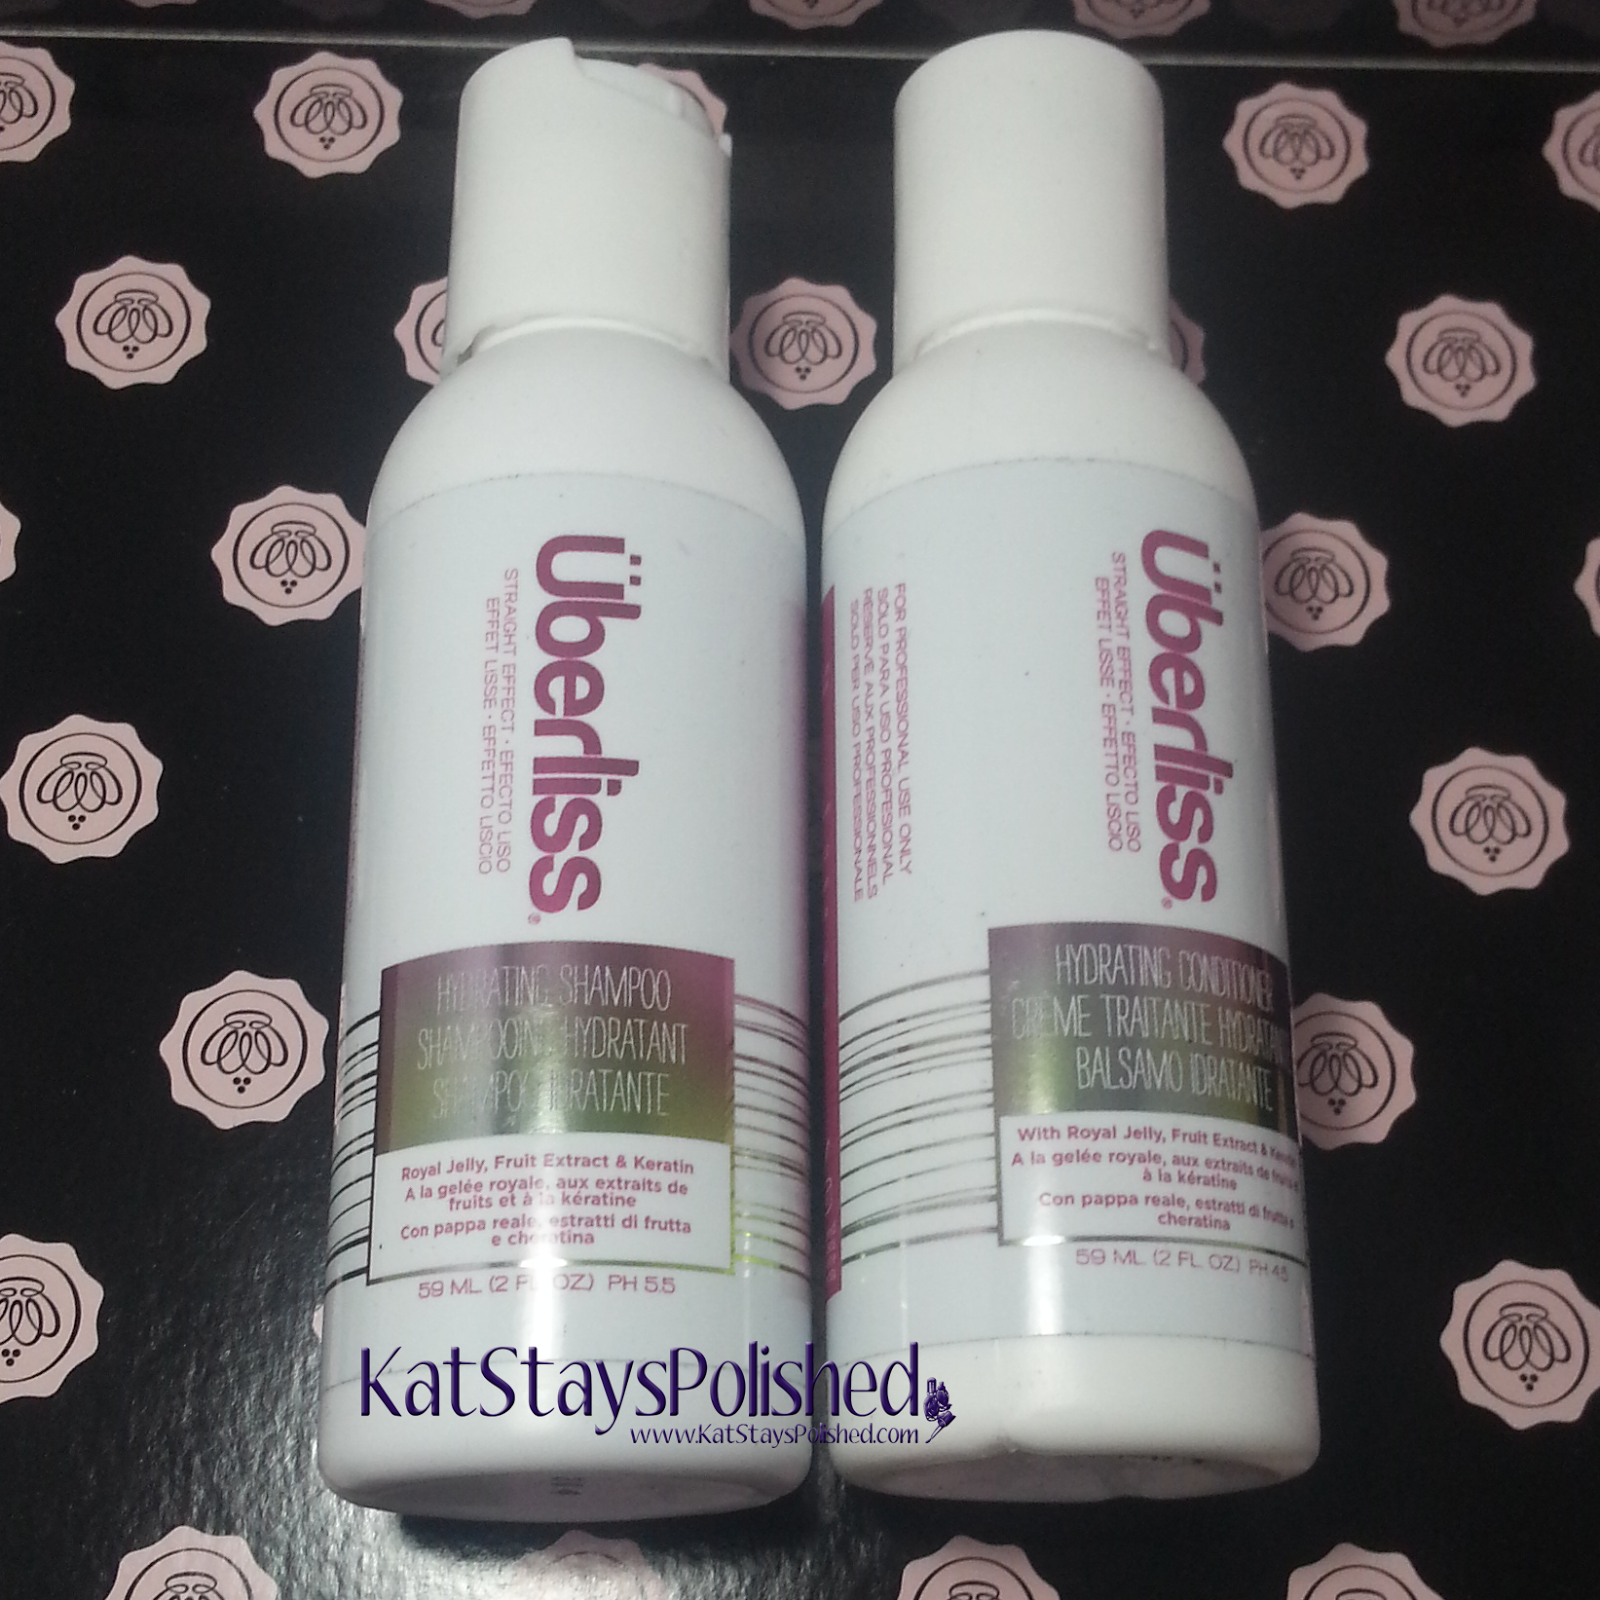 Glossybox - August 2014 - Uberliss Hydrating Shampoo and Conditioner | Kat Stays Polished